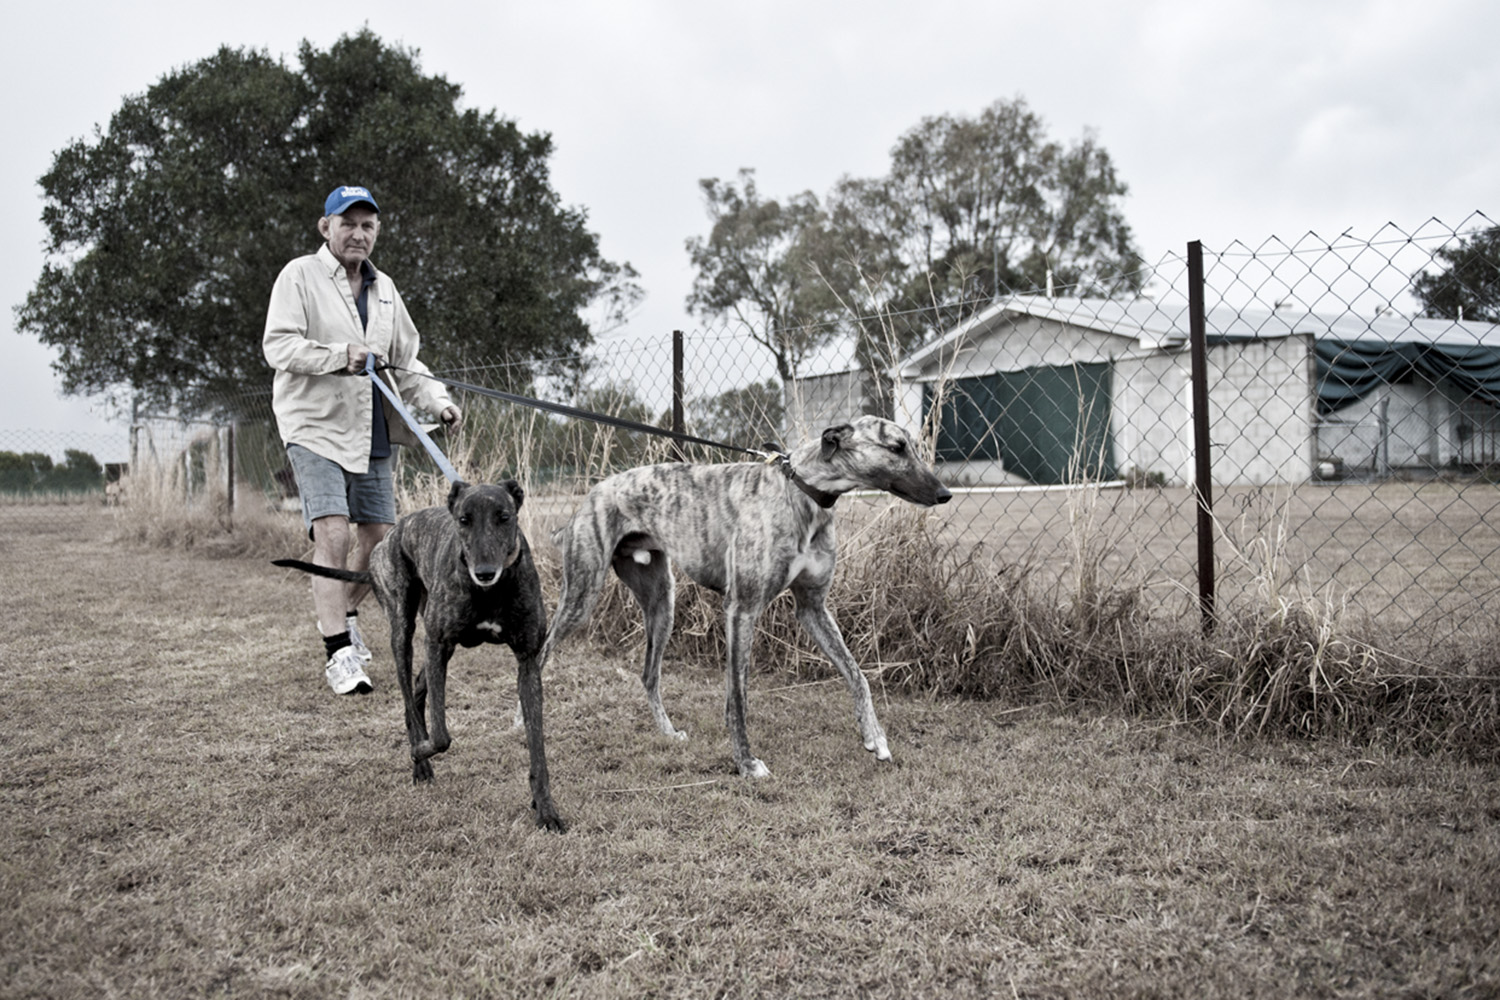 image of AARONTAIT COPYRIGHTED 2014 436a DOCUMENTARY PHOTOGRAPHER REPORTAGE LIFE SPORT DOGS GREYHOUND RACING STORY HUMAN DISHLICKER DISH LICKER 